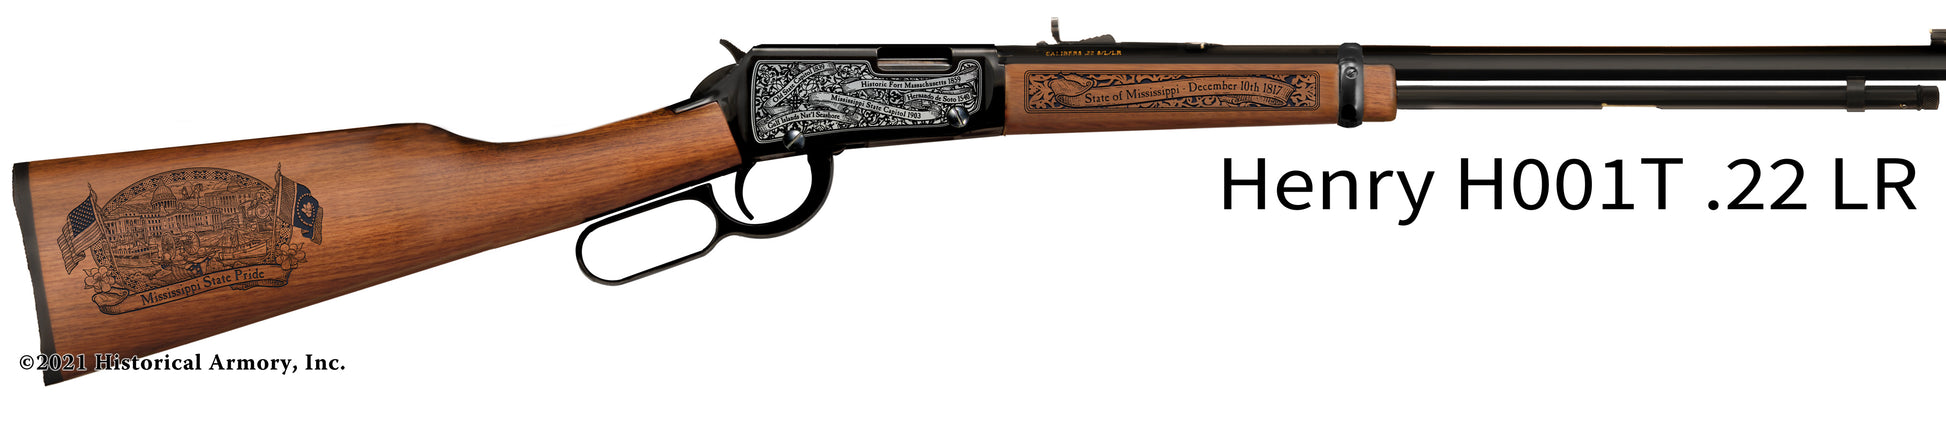 Mississippi State Pride Engraved H00T Henry Rifle